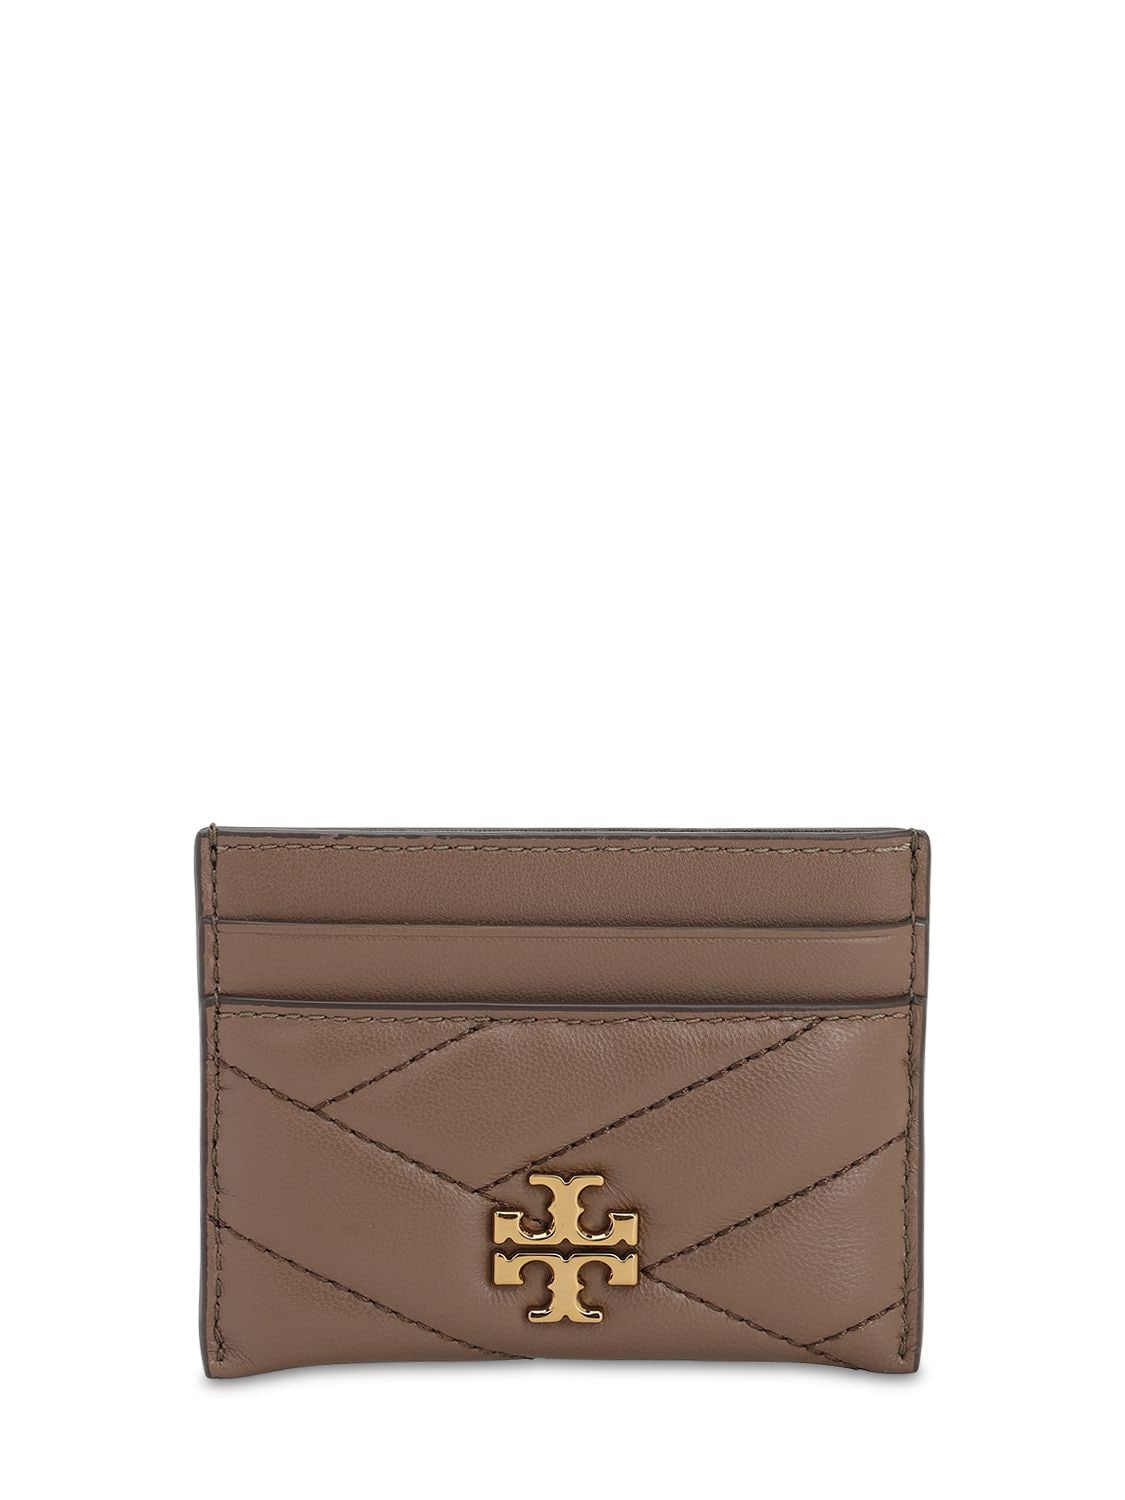 Tory Burch Kira Quilted Leather Card Holder In Taupe